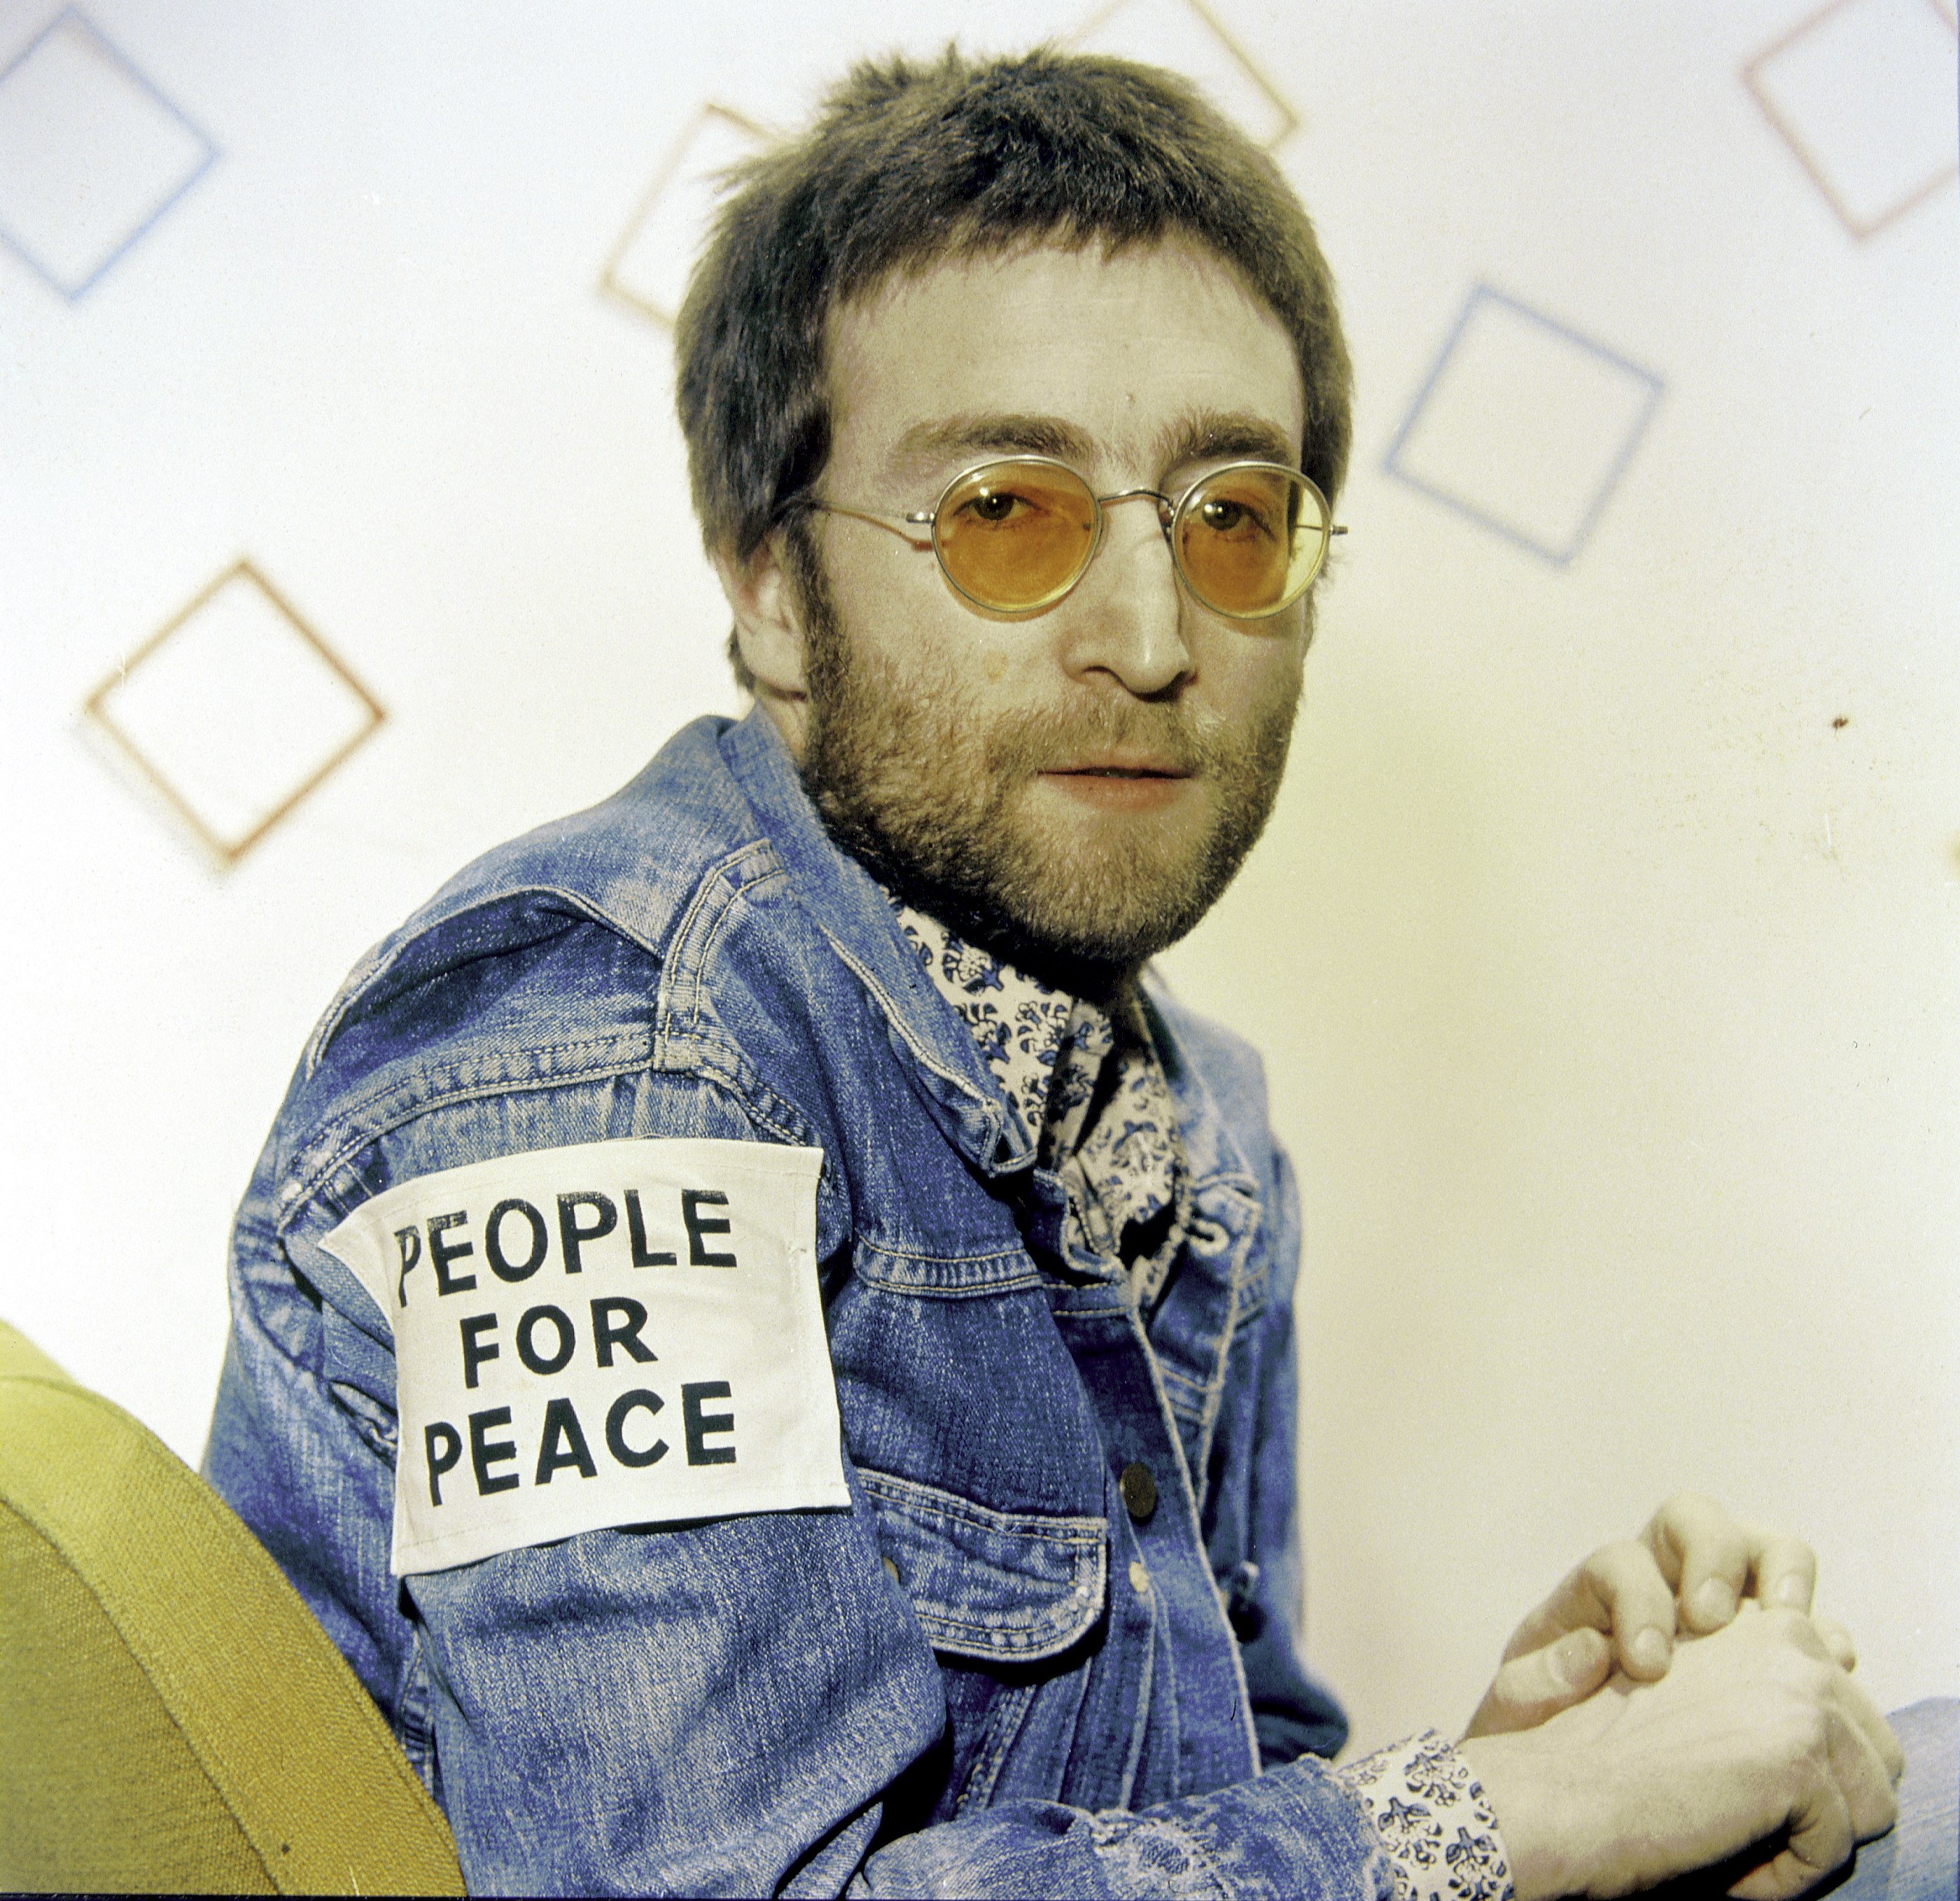 John Lennon wearing yellow glasses and a patch reading "People for Peace"